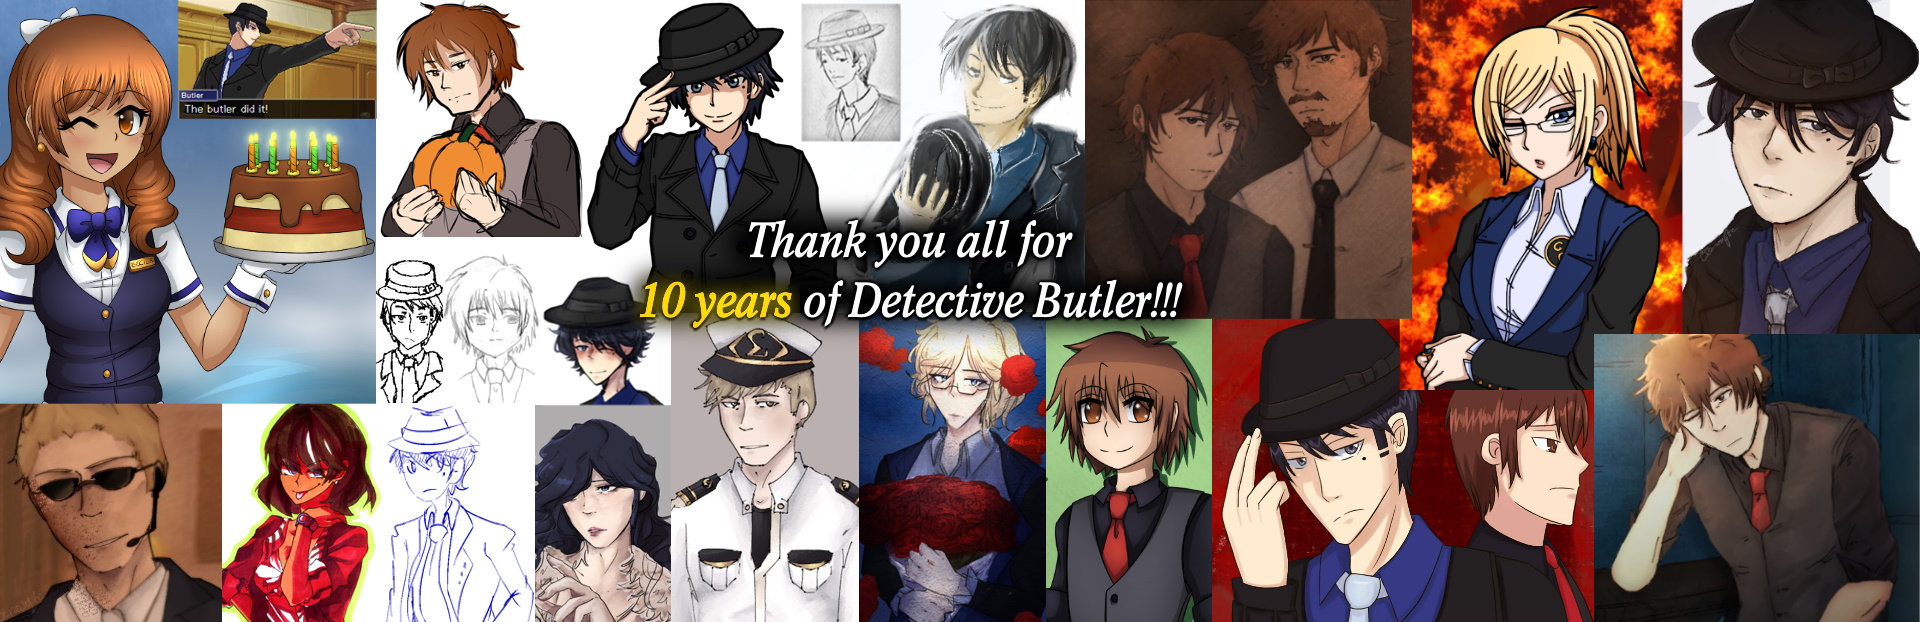 Detective Butler 10th Anniversary Collage of Fanart